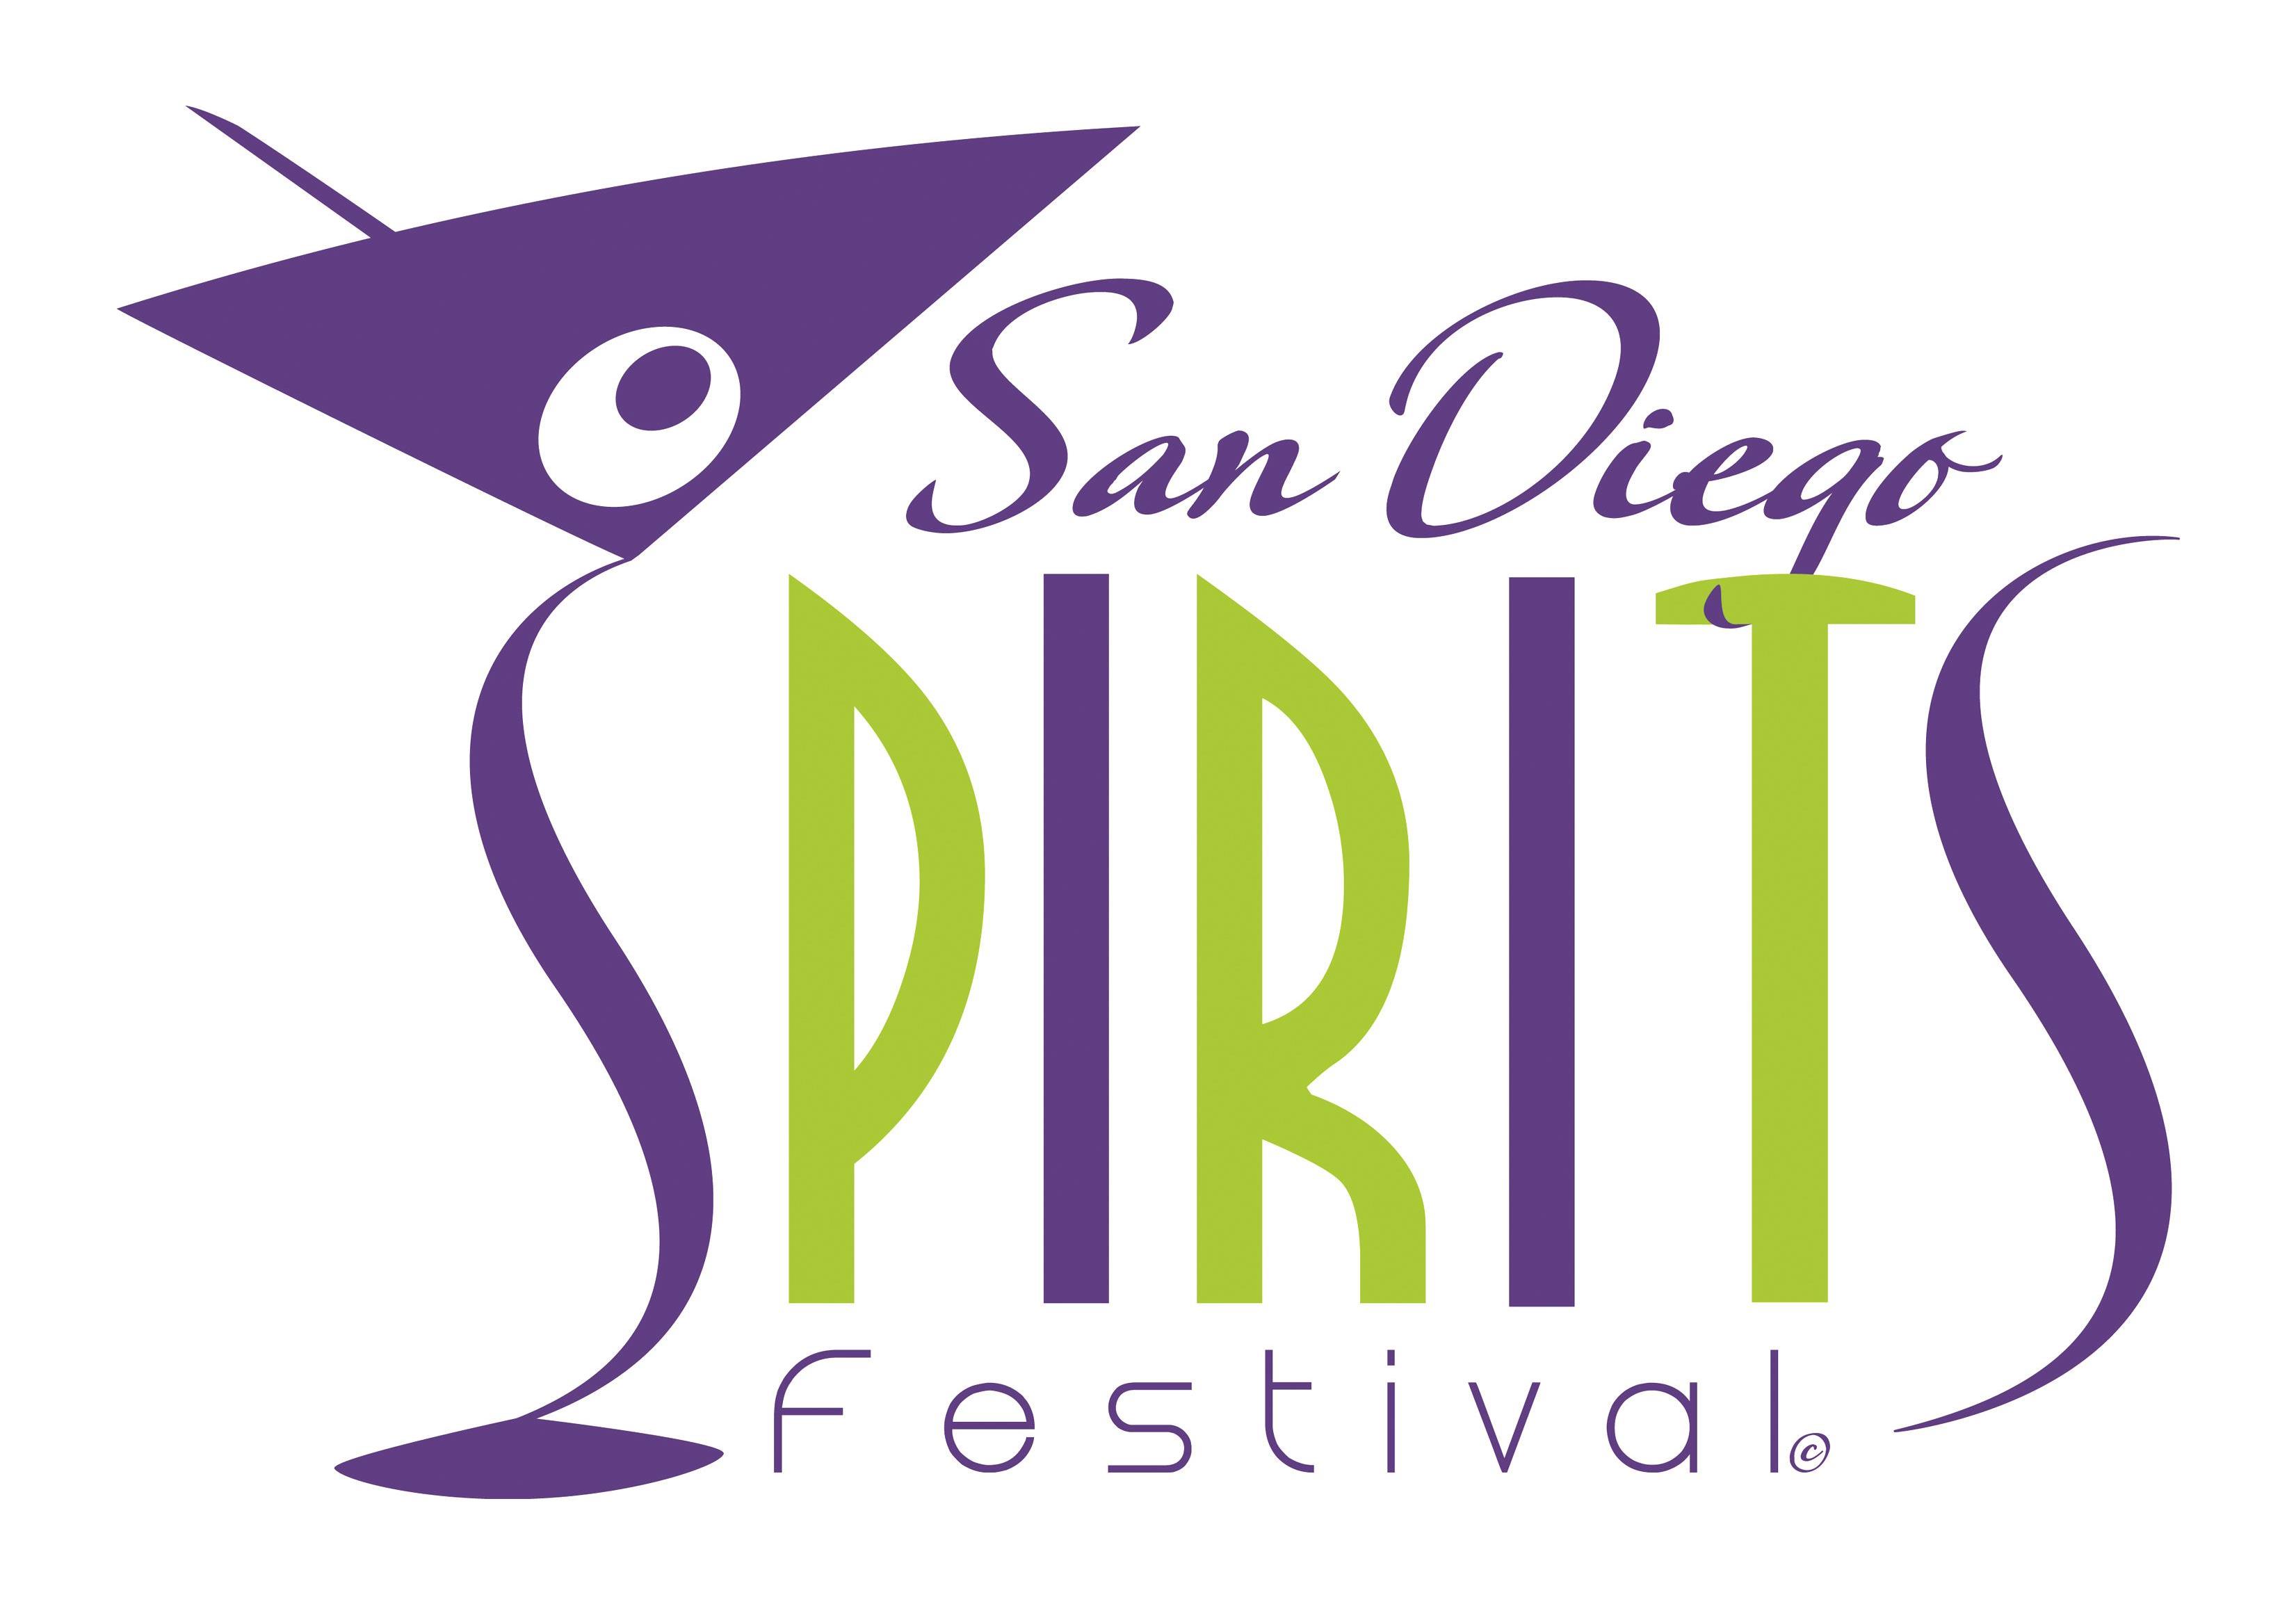 San Diego Spirits Festival The Official Travel Resource for the San